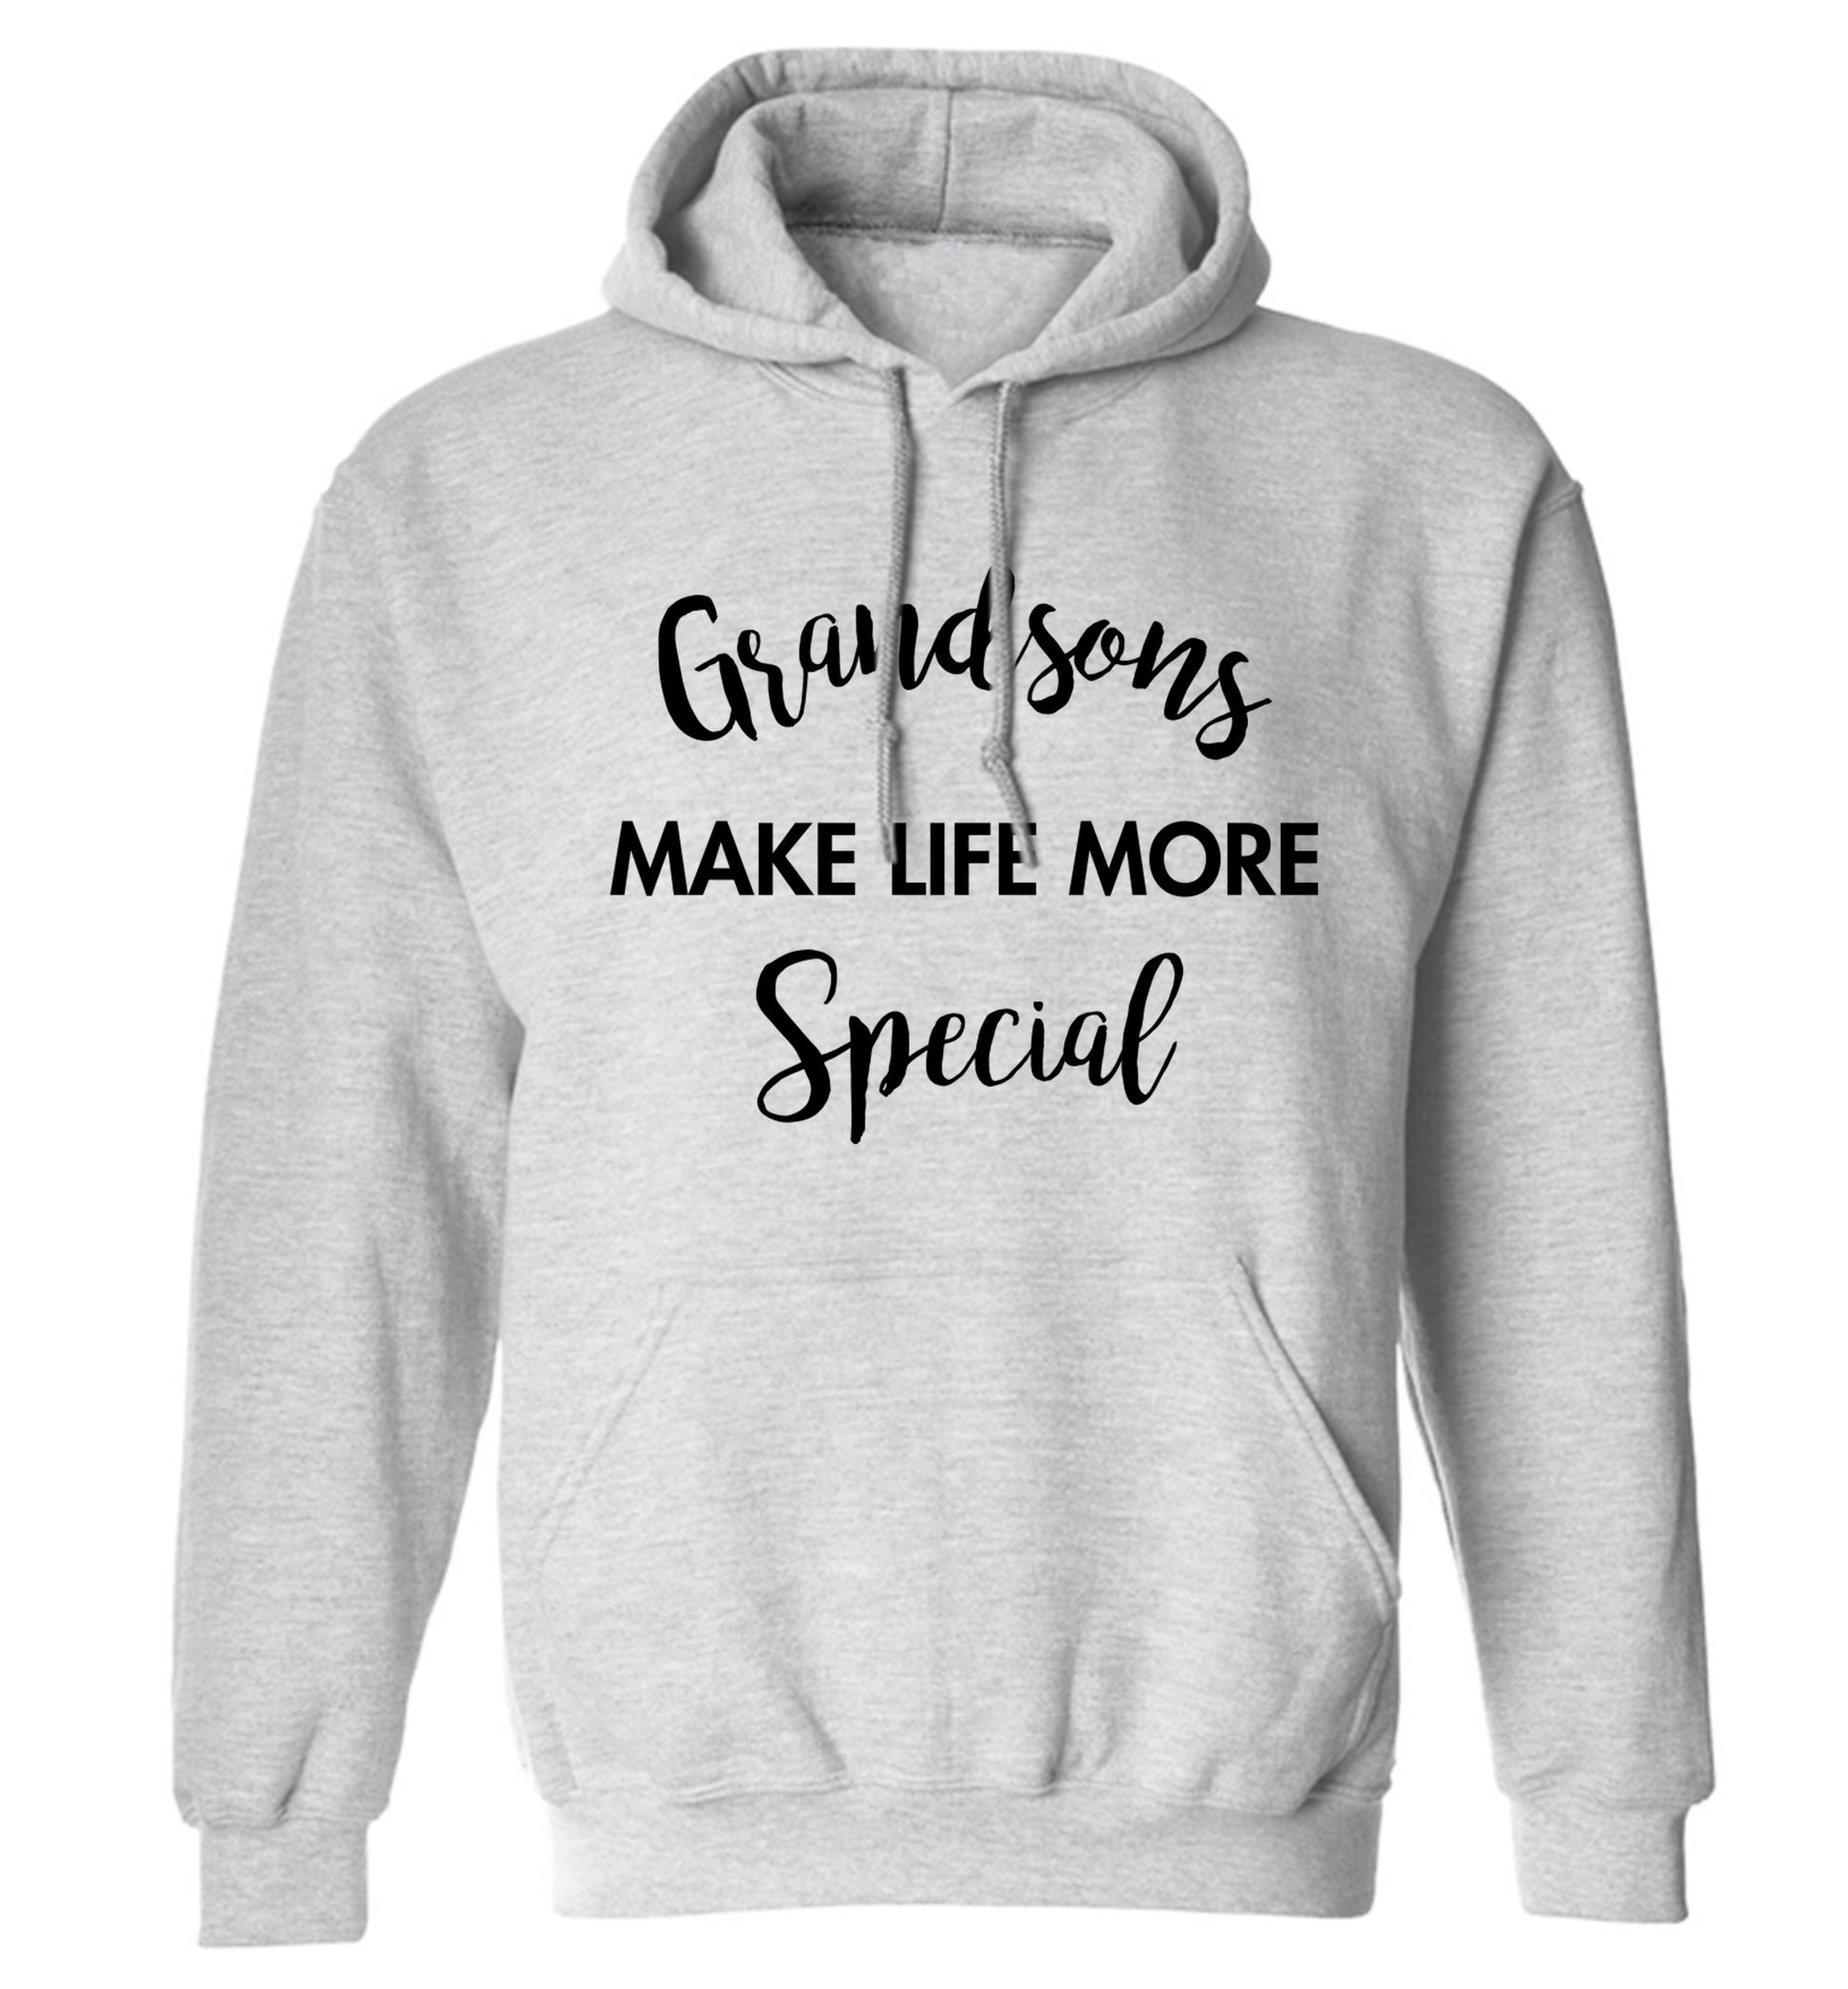 Grandsons make life more special adults unisex grey hoodie 2XL